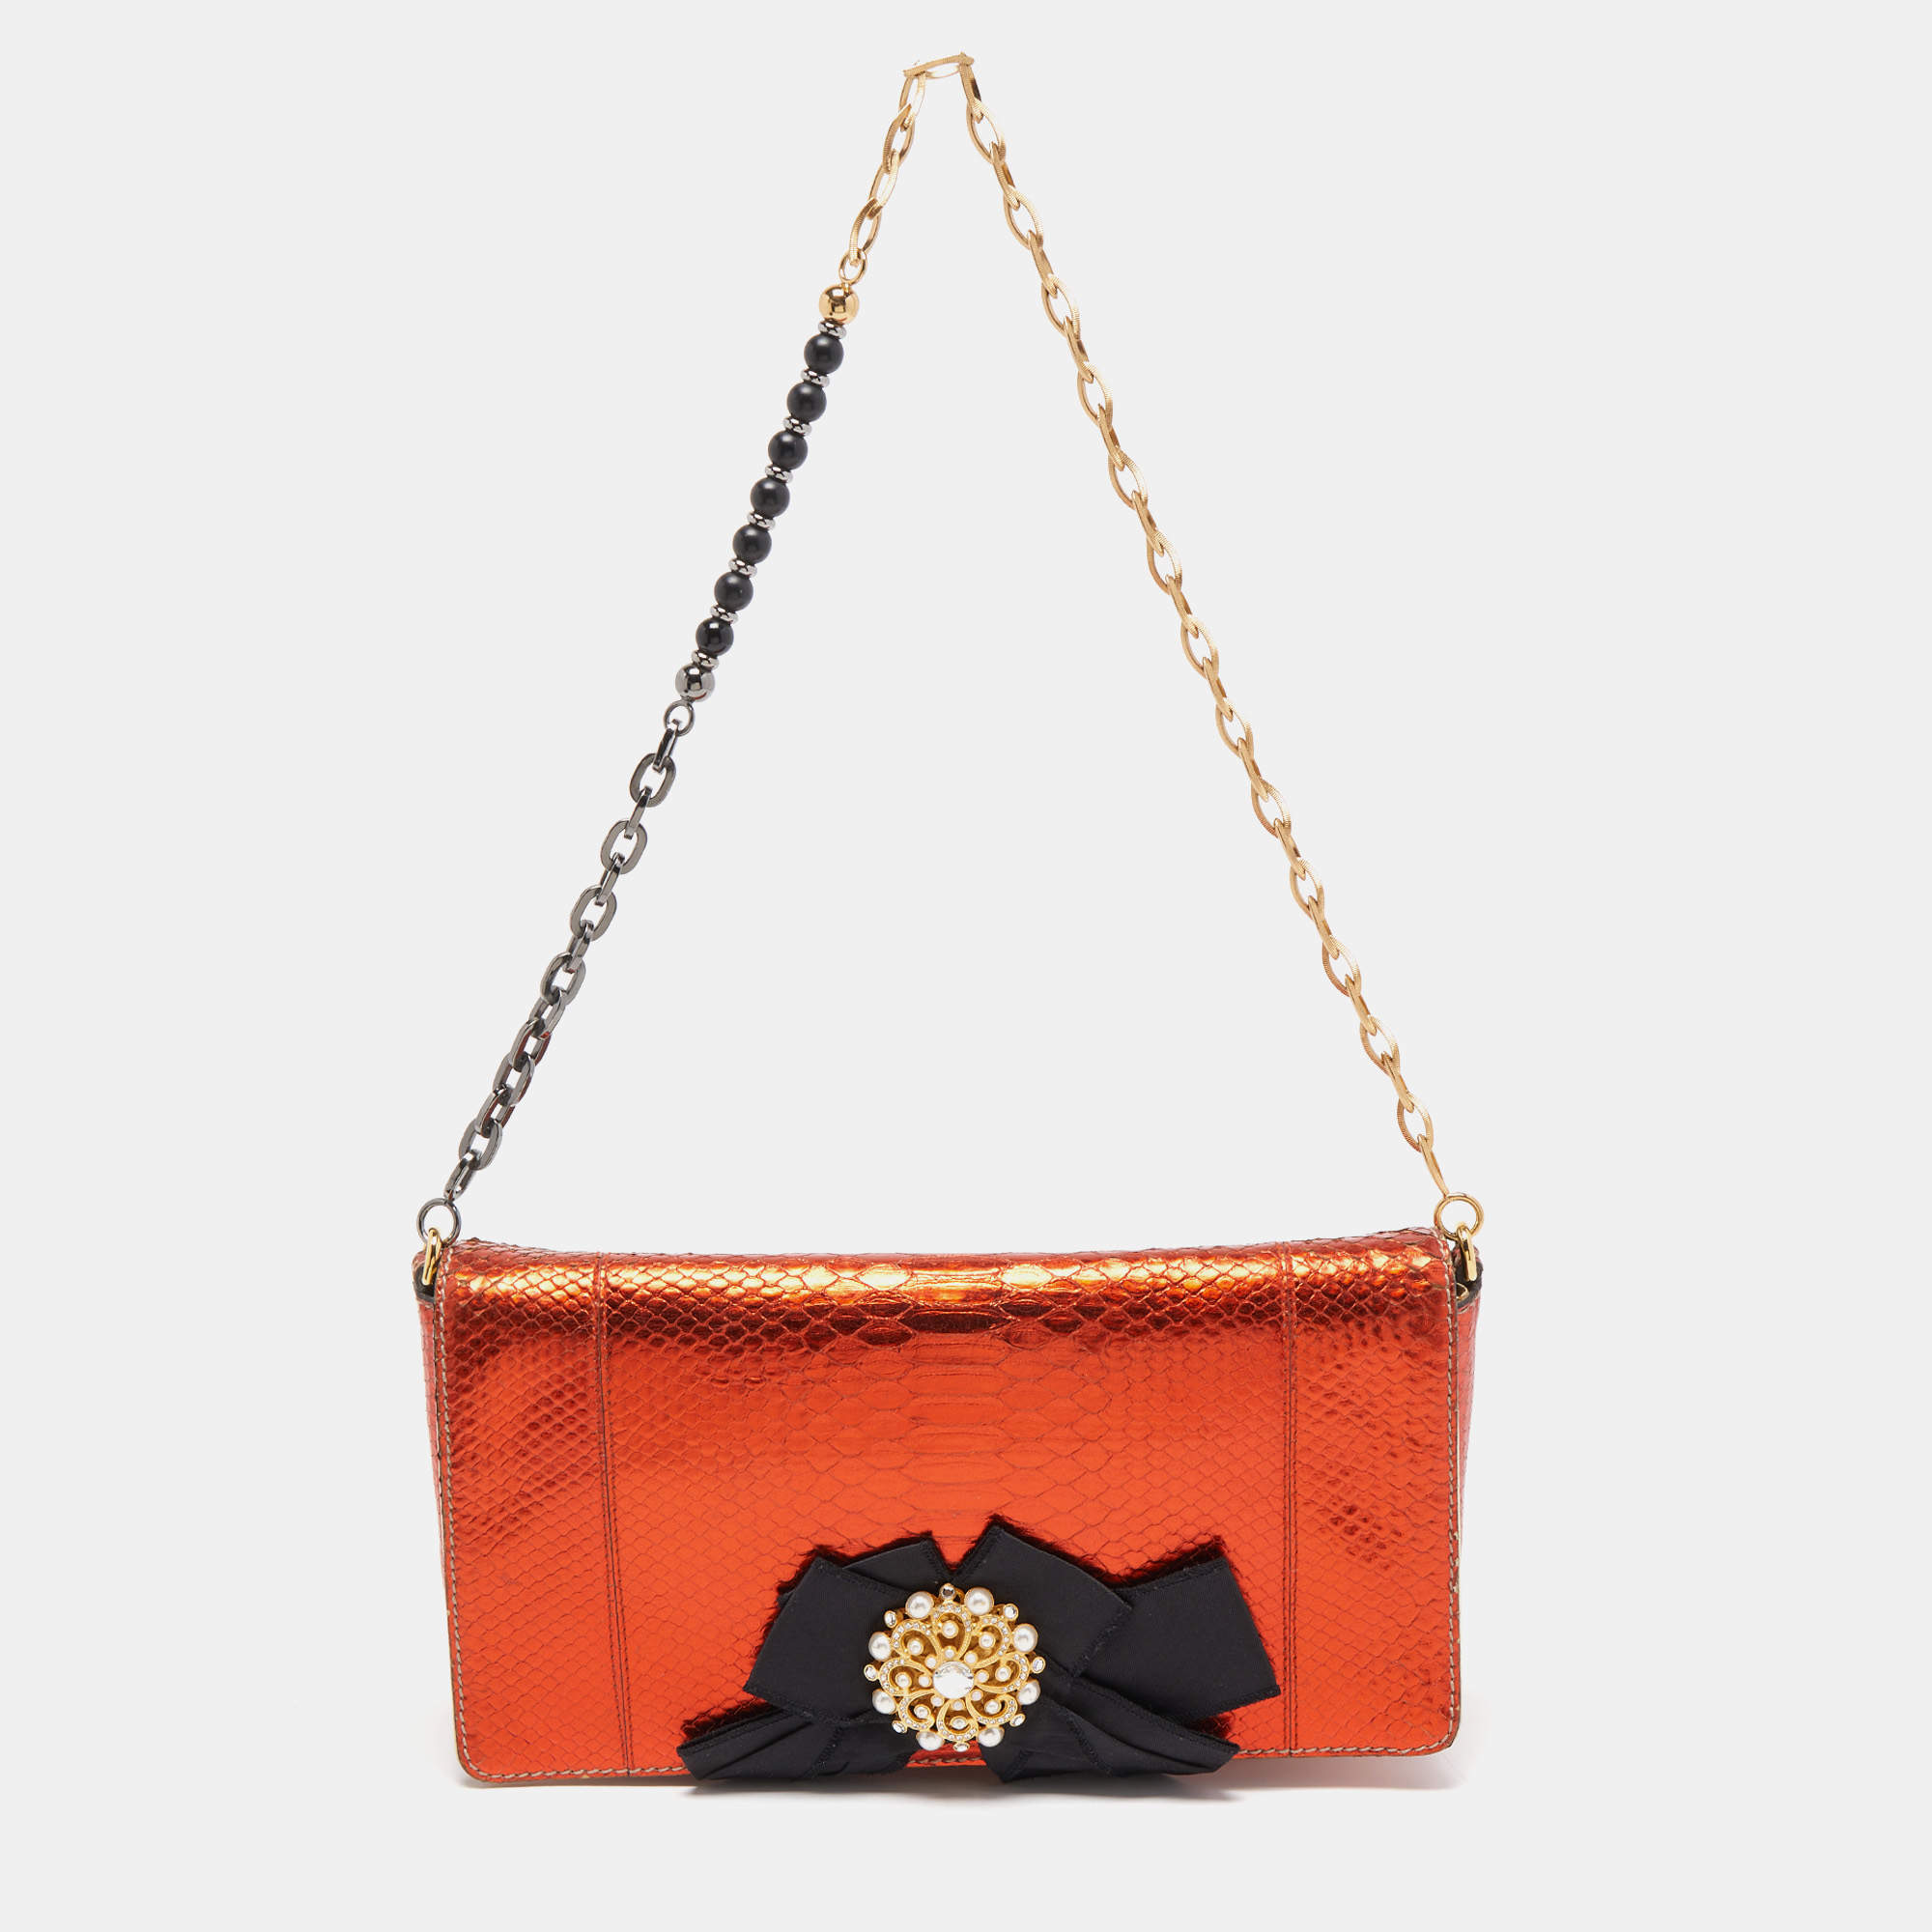 Dolce and Gabbana Limited Edition Bag